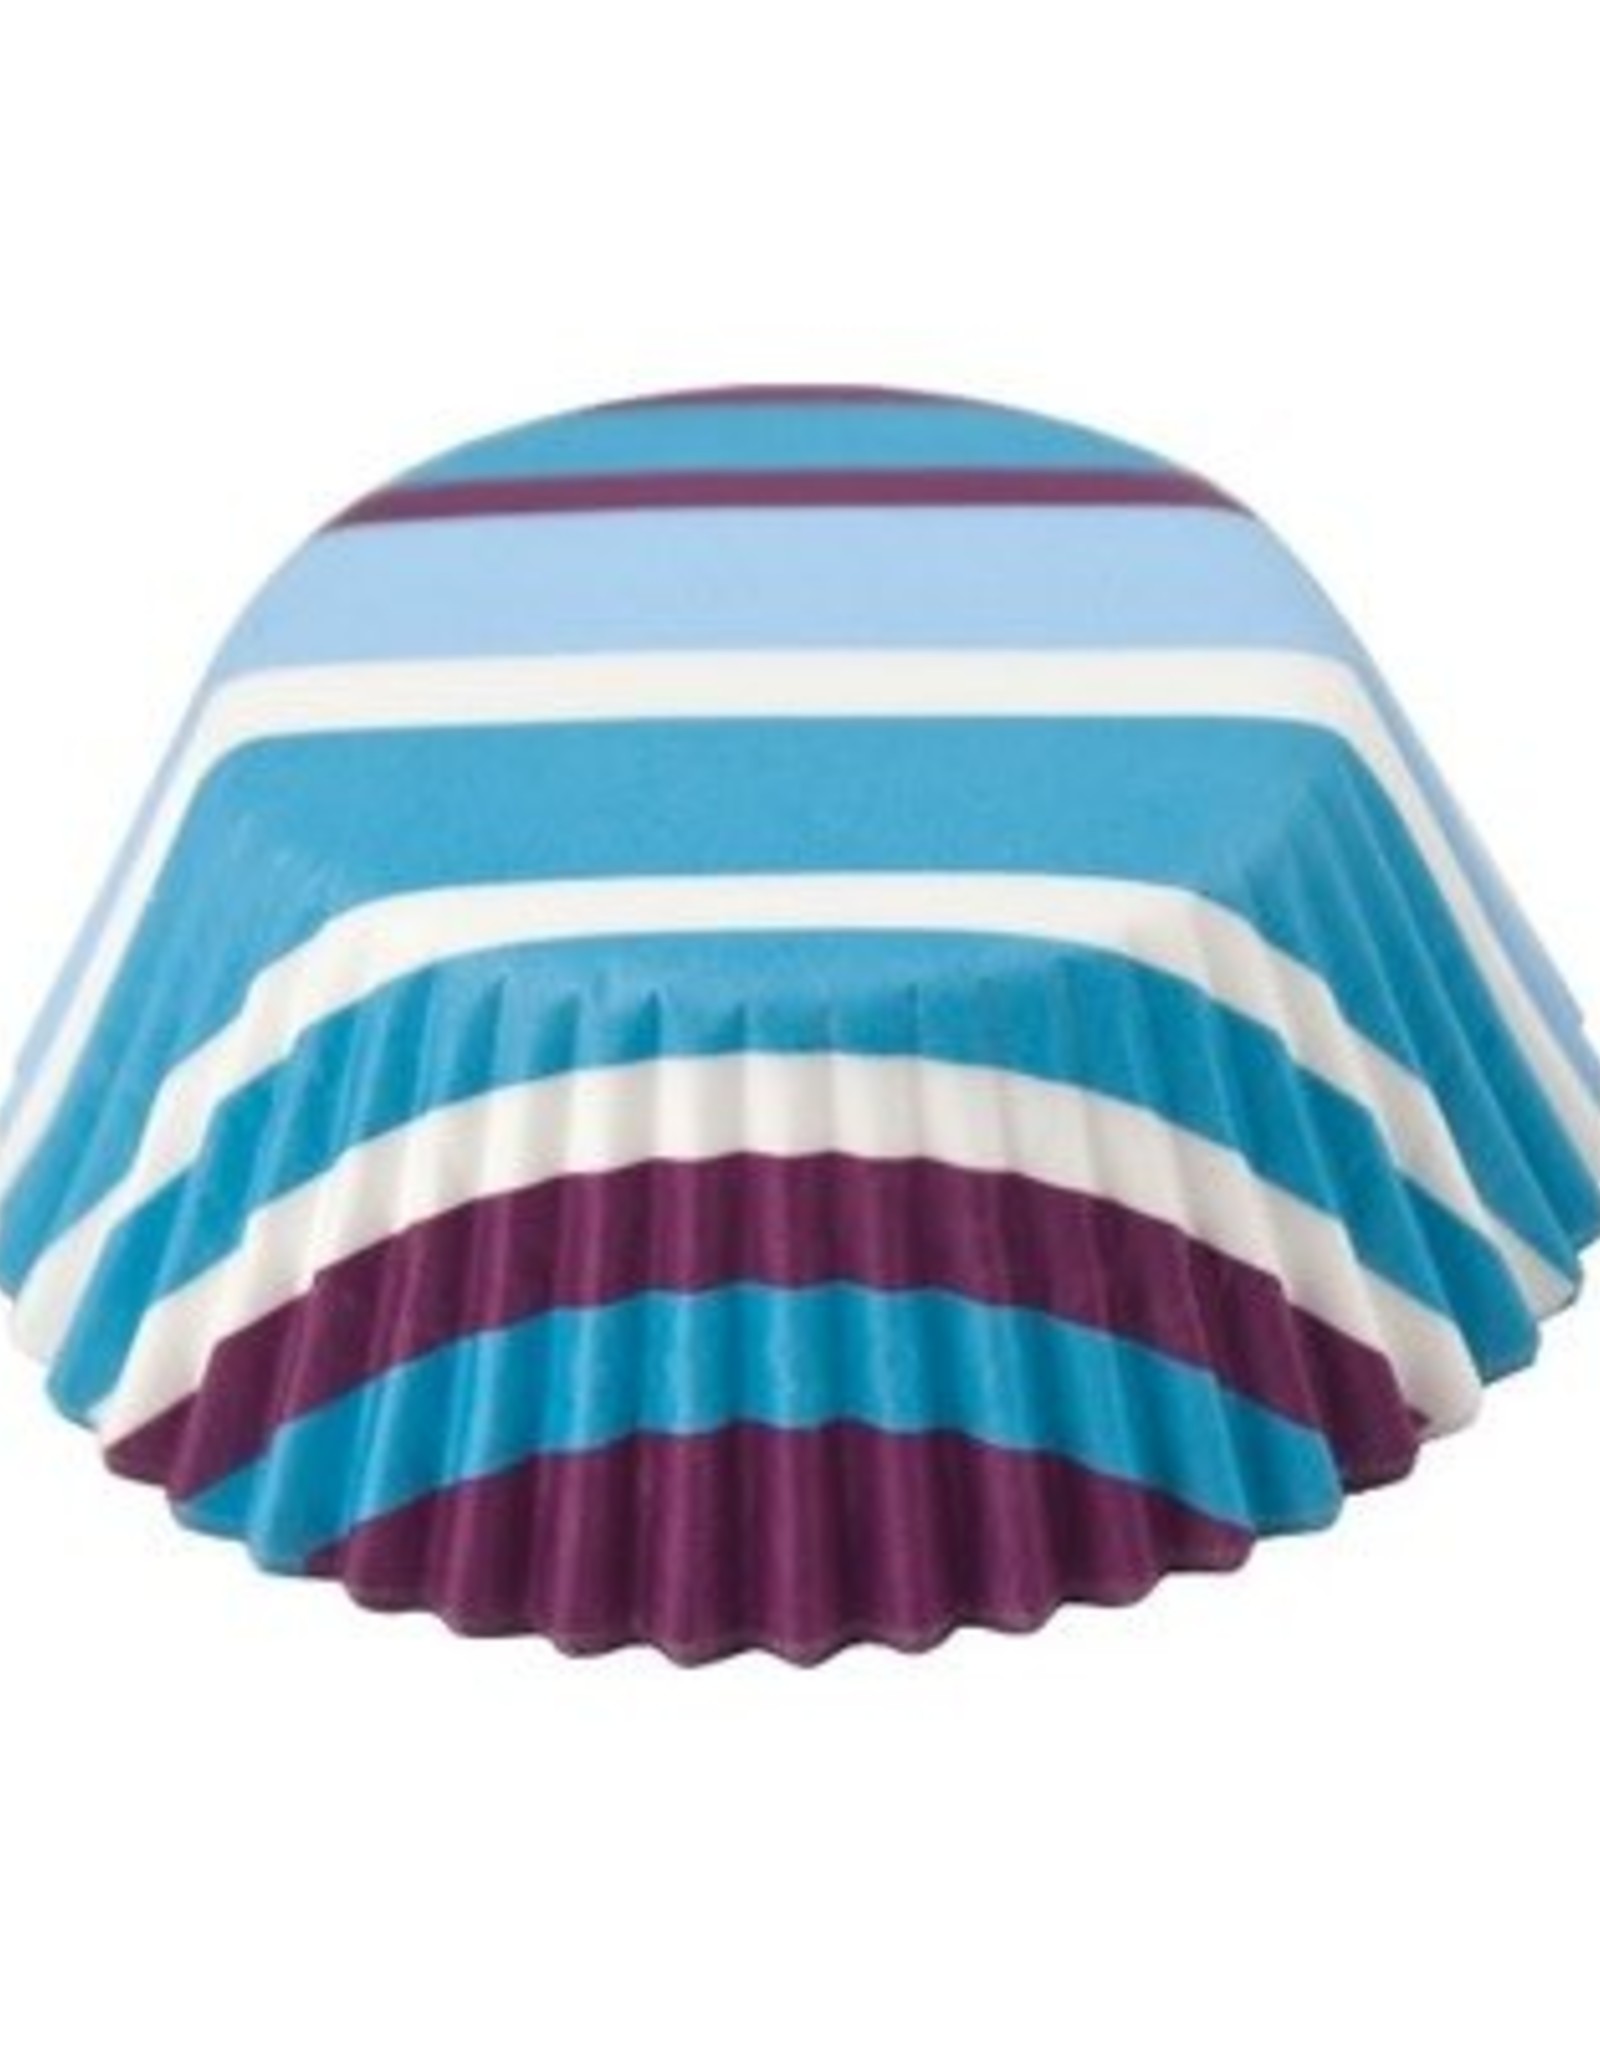 Purple and Blue Stripe Baking Cups